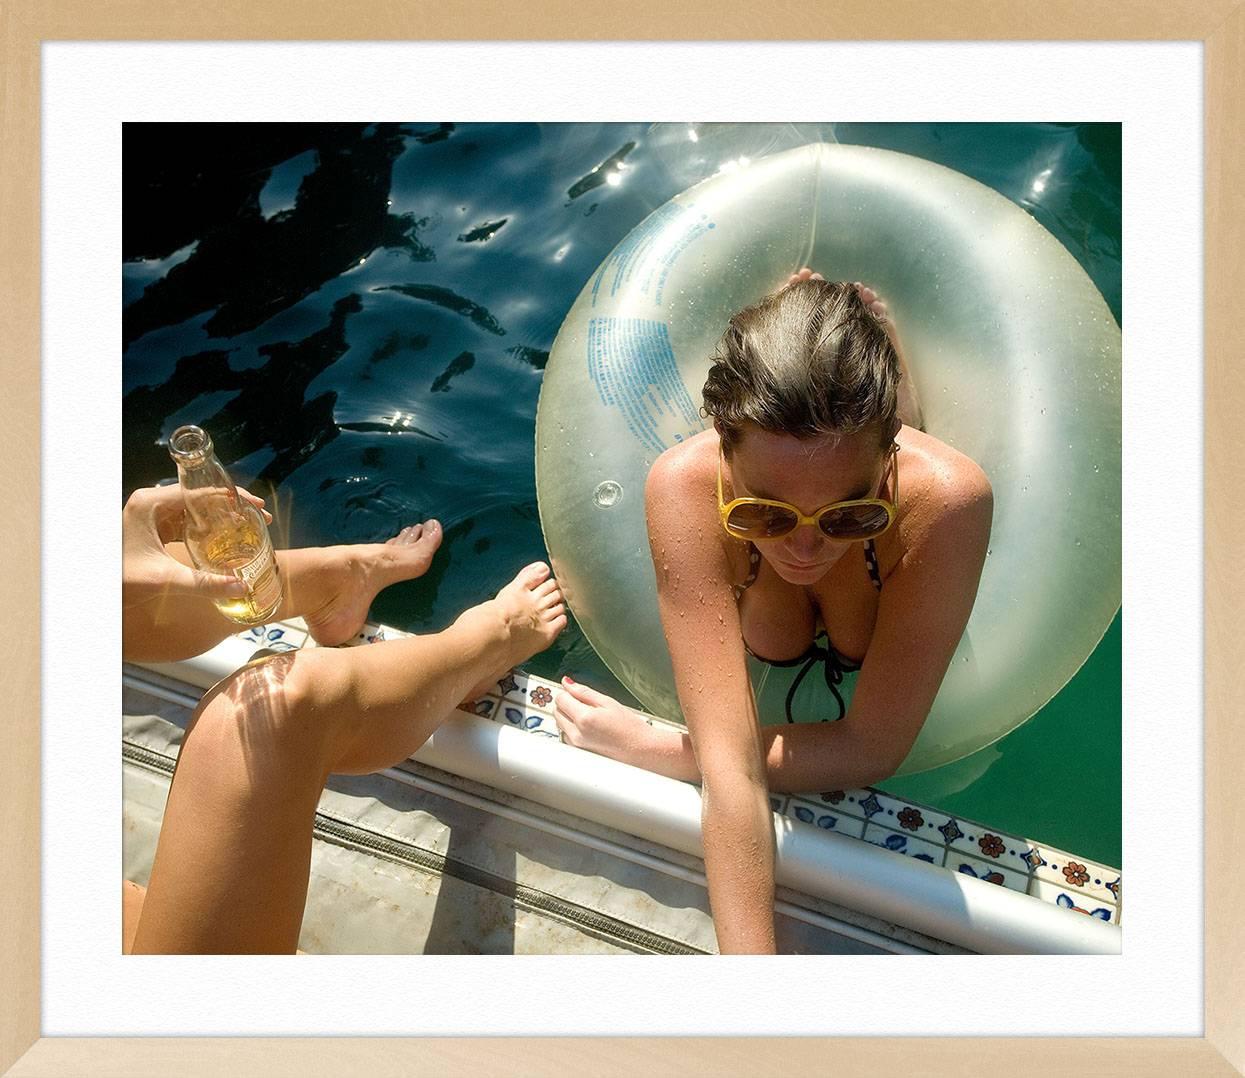 ABOUT THIS PIECE: Louise in Pool, Los Angeles. The husband/wife team, Jeremy and Claire Weiss prefer not to pose their subjects, but let them get comfortable with the shoot and capture authentic moments. 
    
ABOUT THIS ARTIST: The husband/wife